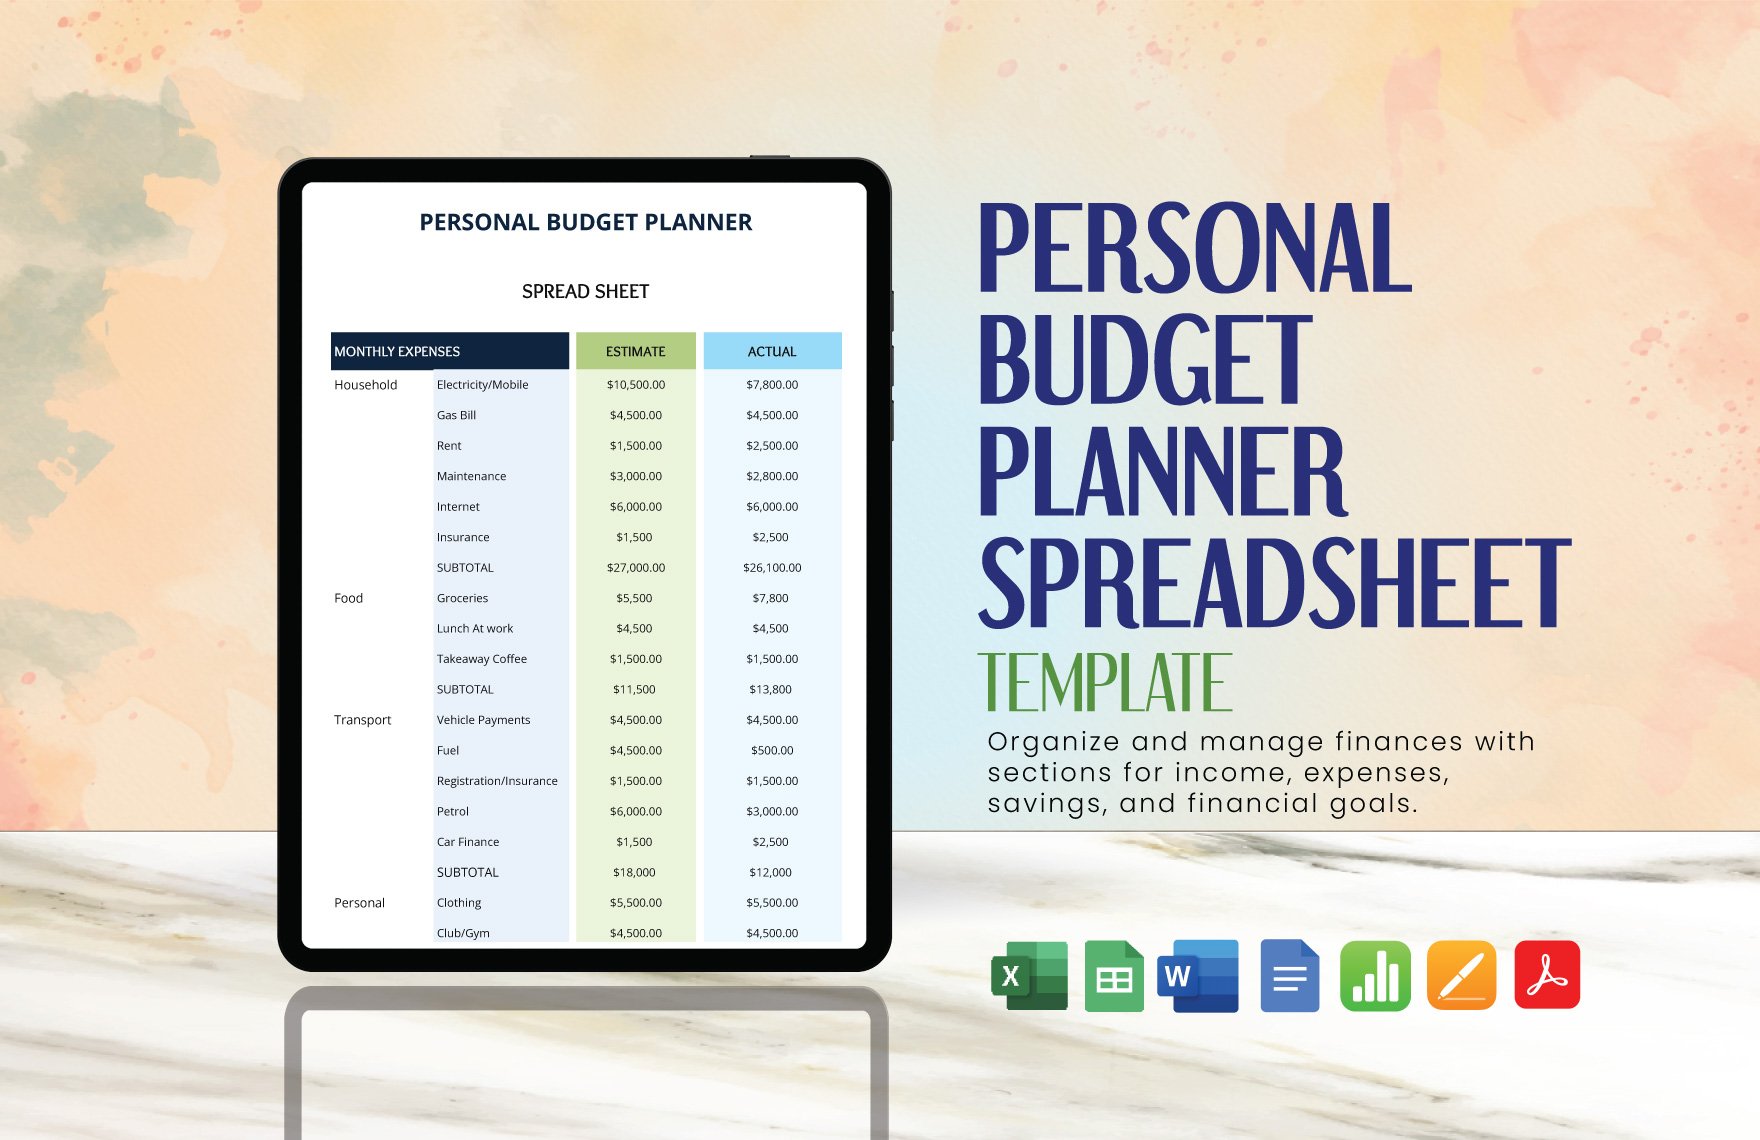 Personal Budget Planner Spreadsheet Template in Word, Google Docs, Excel, PDF, Google Sheets, Apple Pages, Apple Numbers